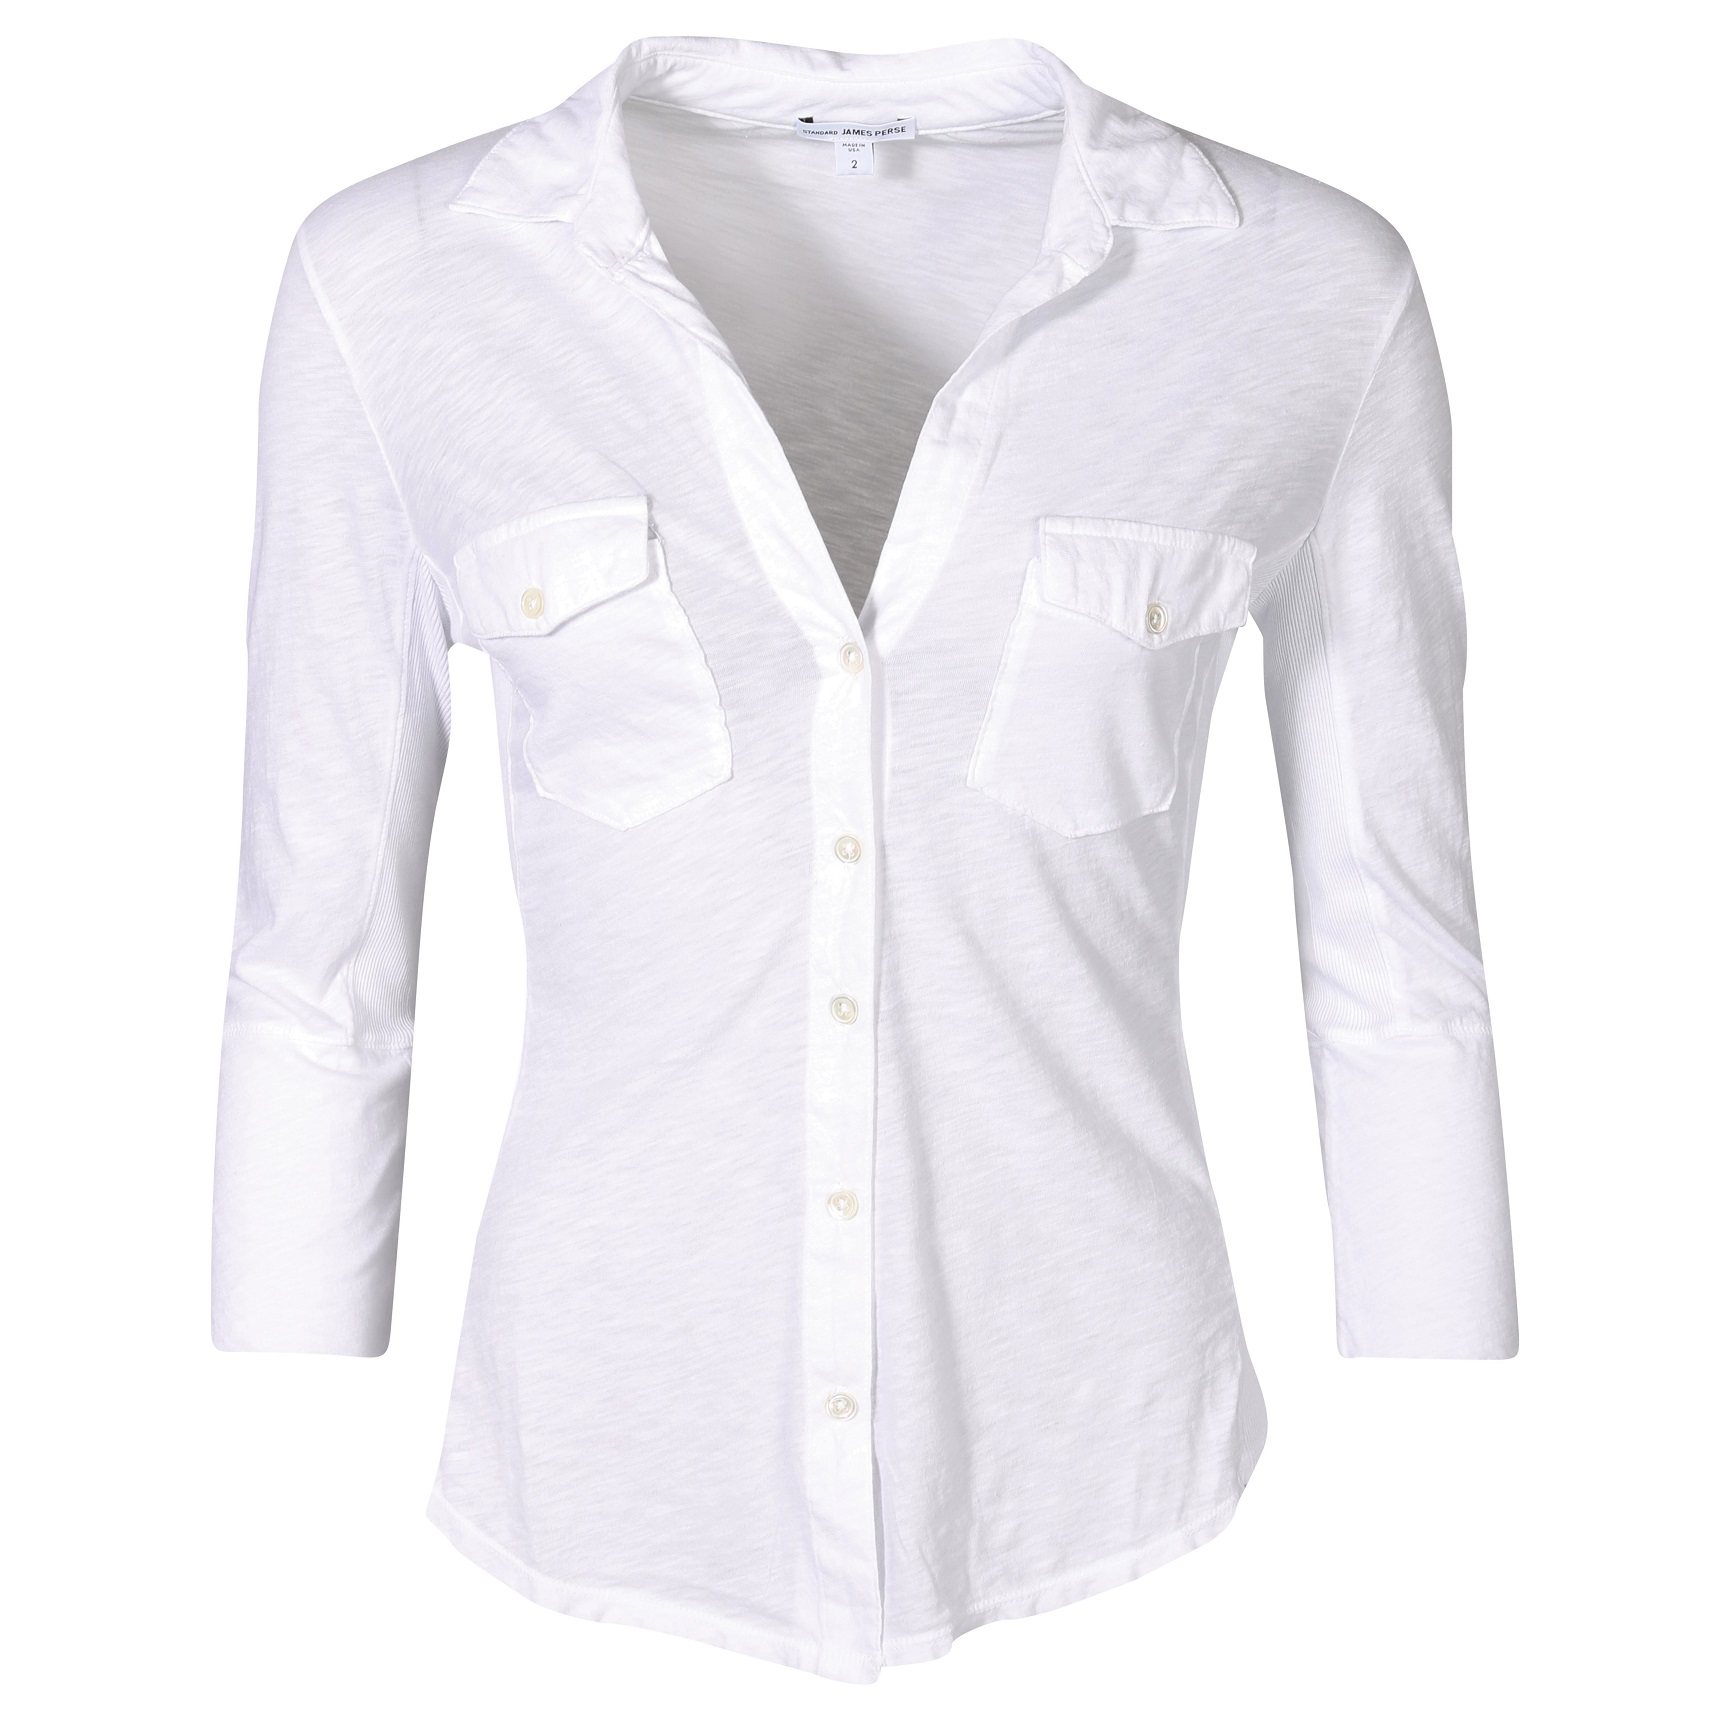 JAMES PERSE Contrast Panel Shirt in White 3/L